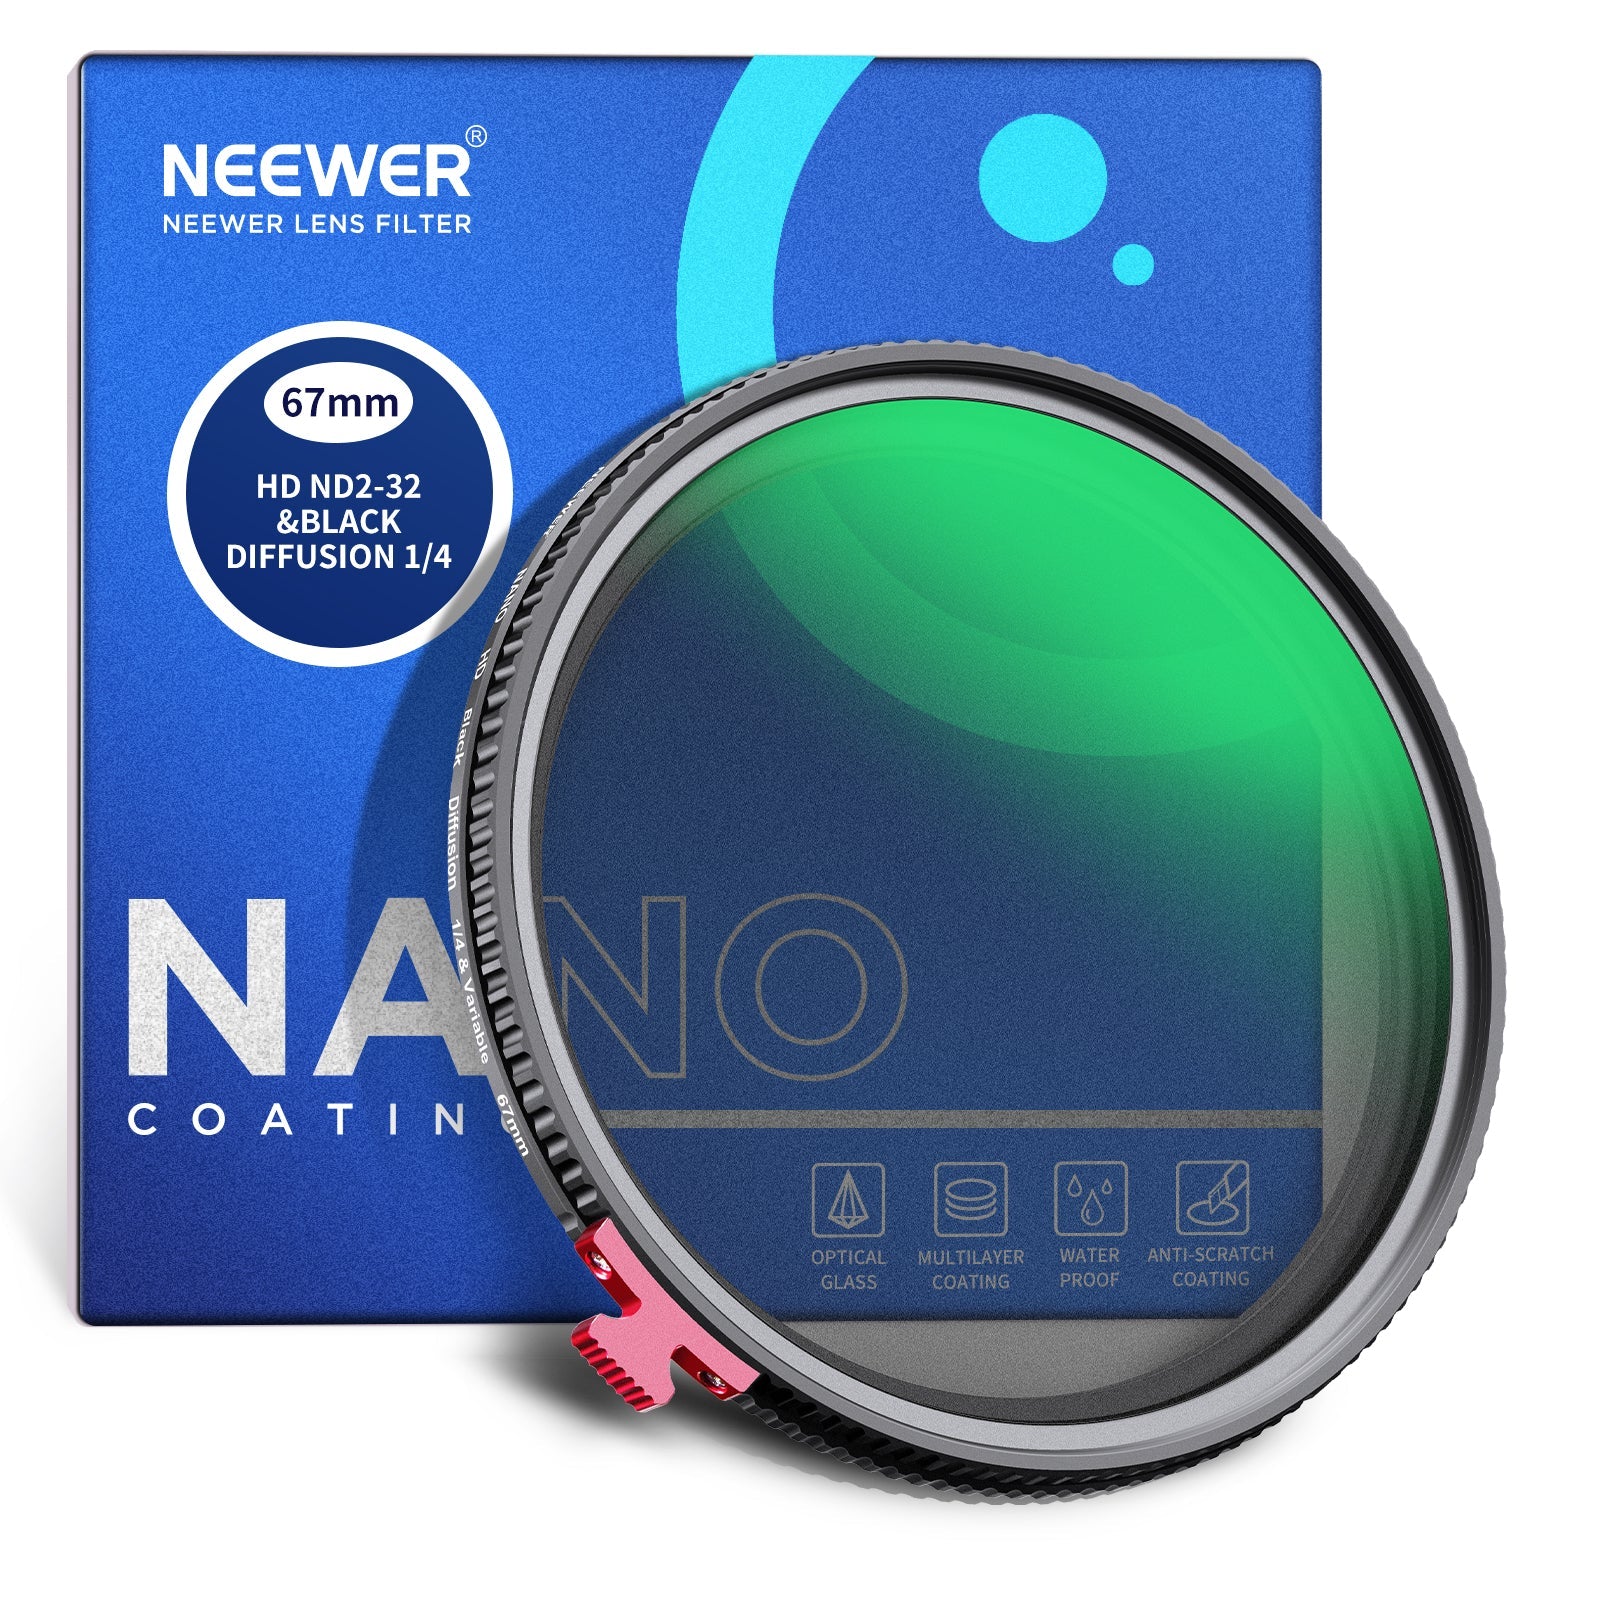 NEEWER 2 in 1 Black Diffusion 1/4 Effect with ND2-ND32 Variable ND